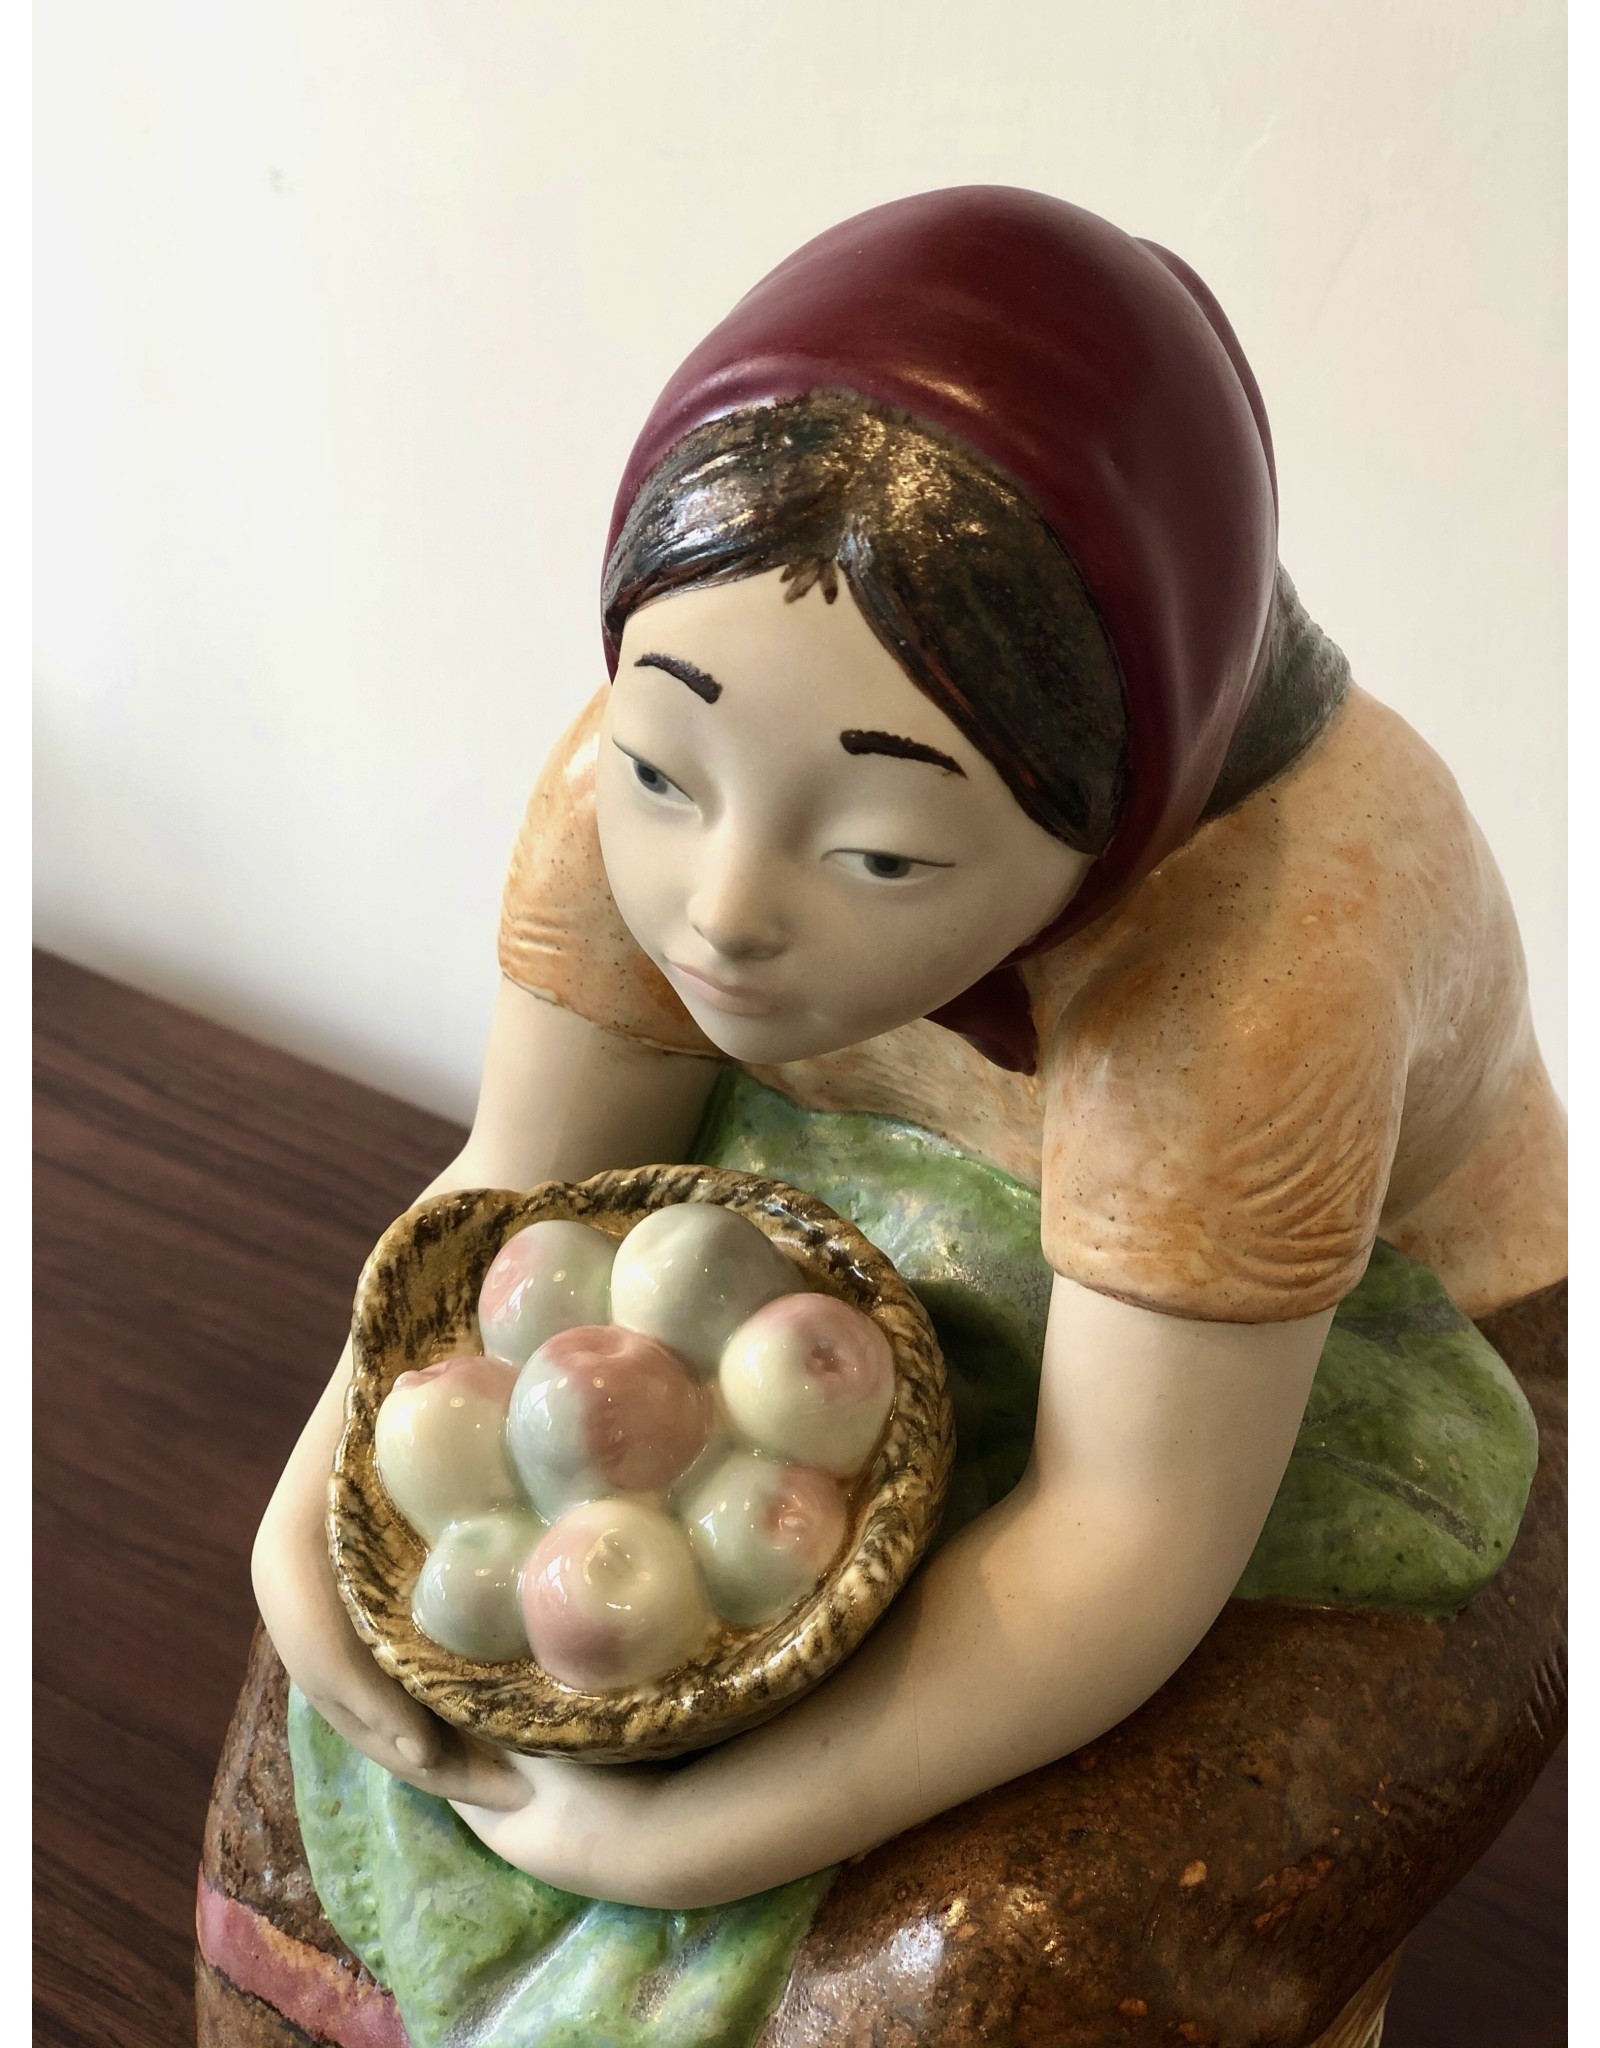 RARE 1970's ZAPHIR FIGURINE OF SEATED FARMER'S WIFE WITH BASKET